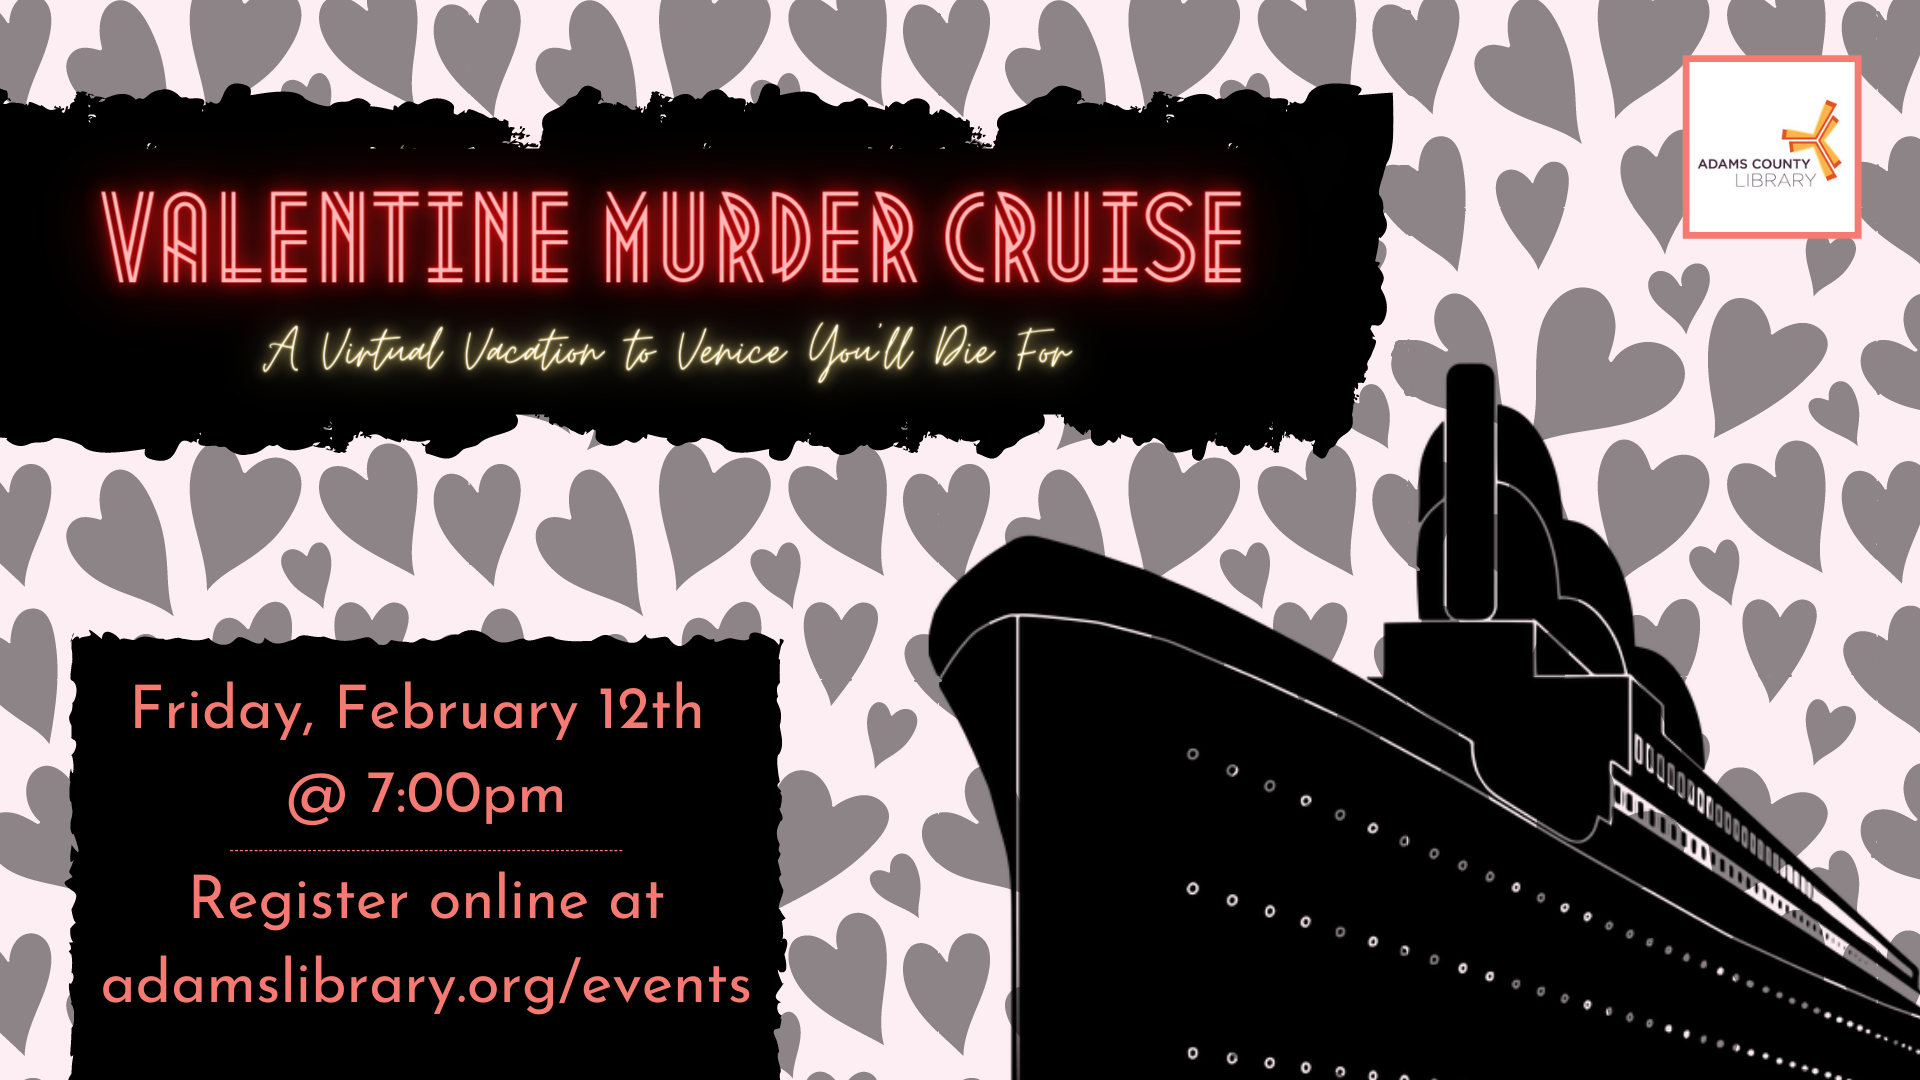 Join us for a Virtual Valentine Murder Cruise on Friday February 12th at 7:00pm.